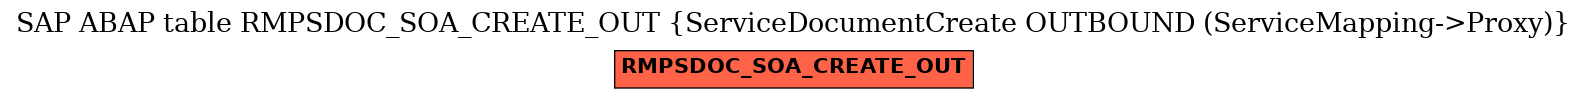 E-R Diagram for table RMPSDOC_SOA_CREATE_OUT (ServiceDocumentCreate OUTBOUND (ServiceMapping->Proxy))